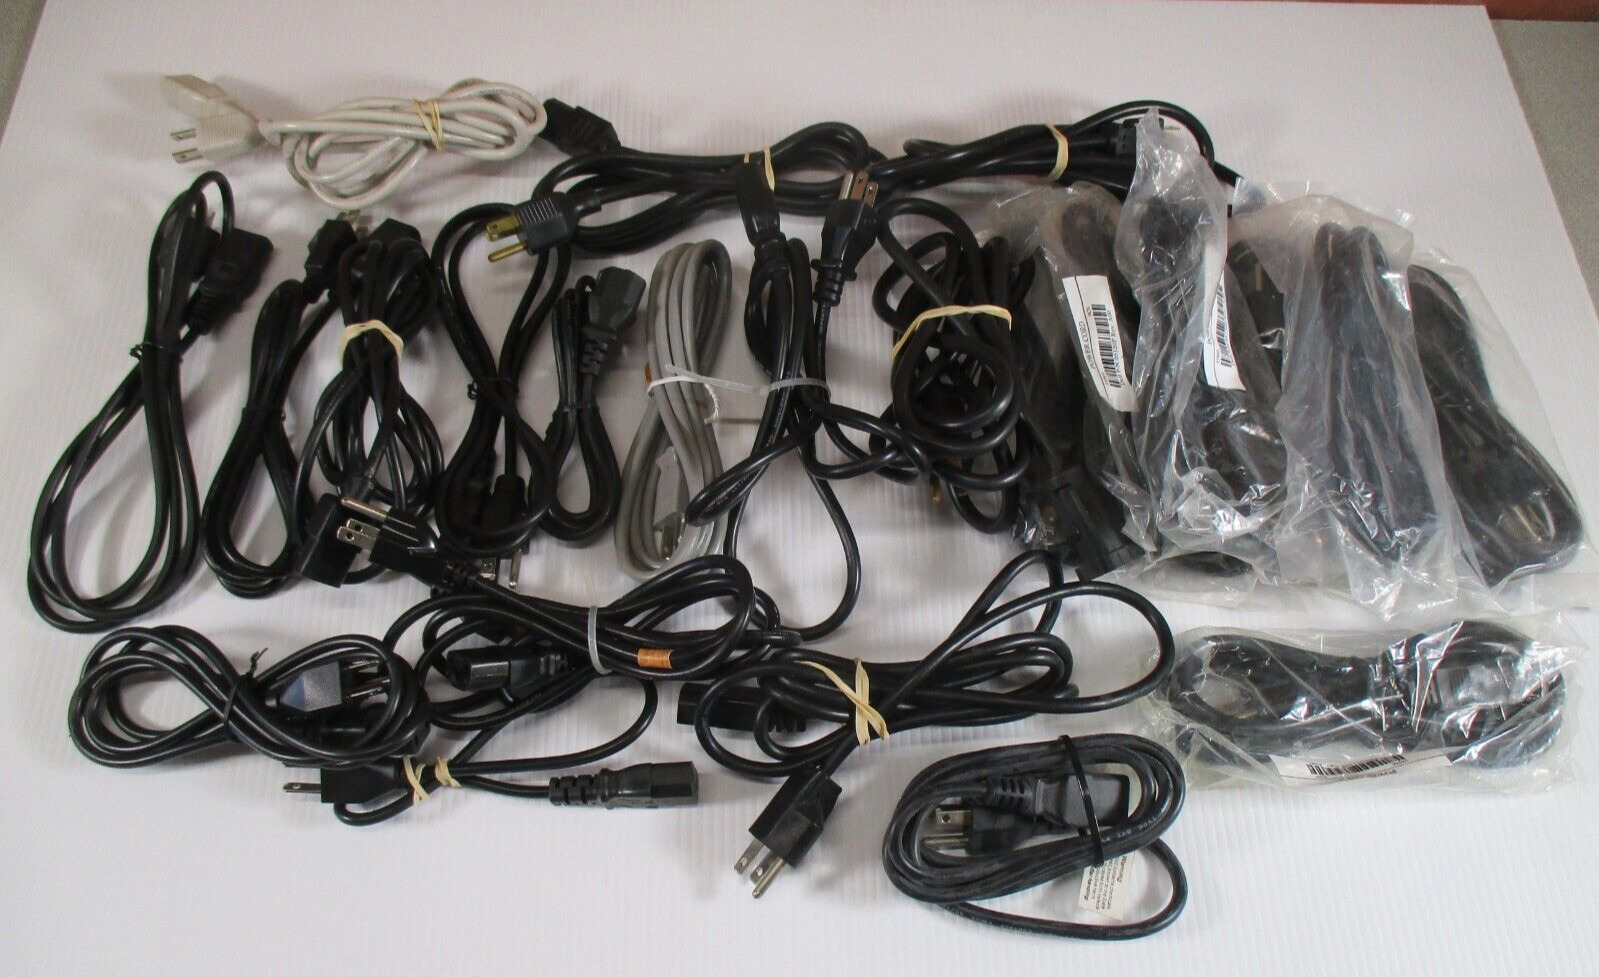 3-Prong AC Power Cord Cable Standard Desktop Monitor Computer PC Lot of 24